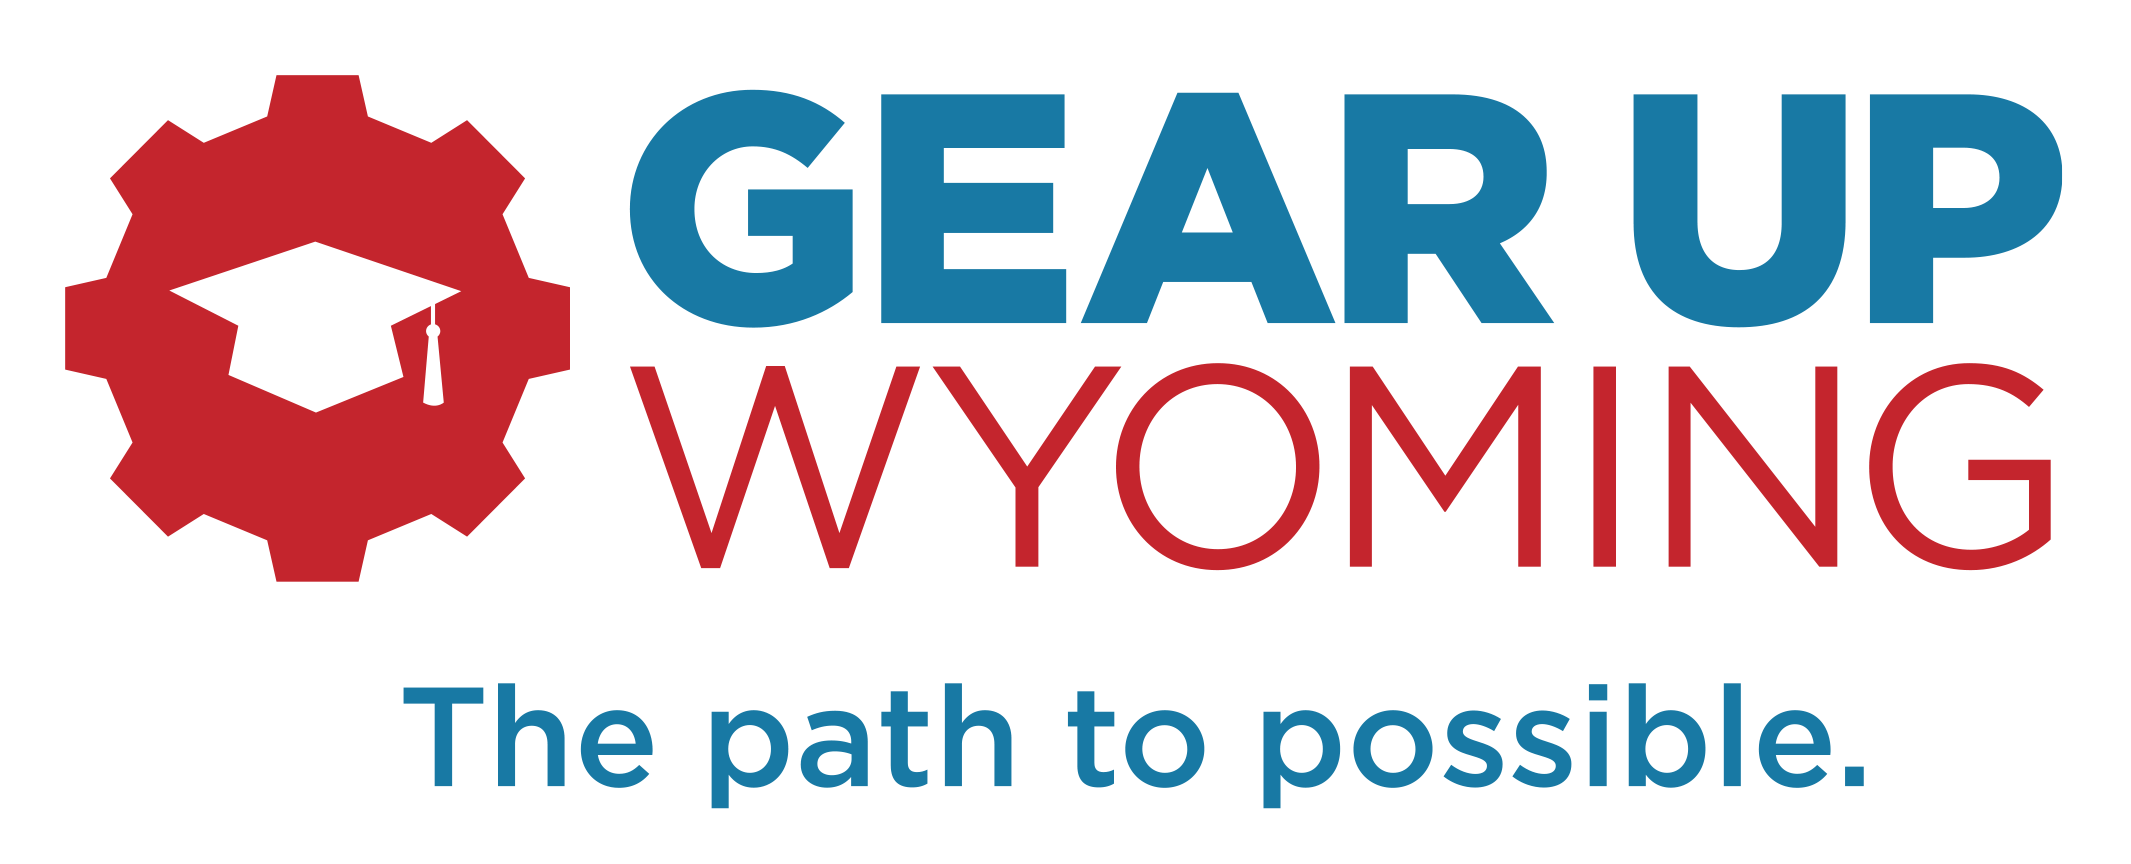 GEAR UP Wyoming - NWCCD – NWCCD